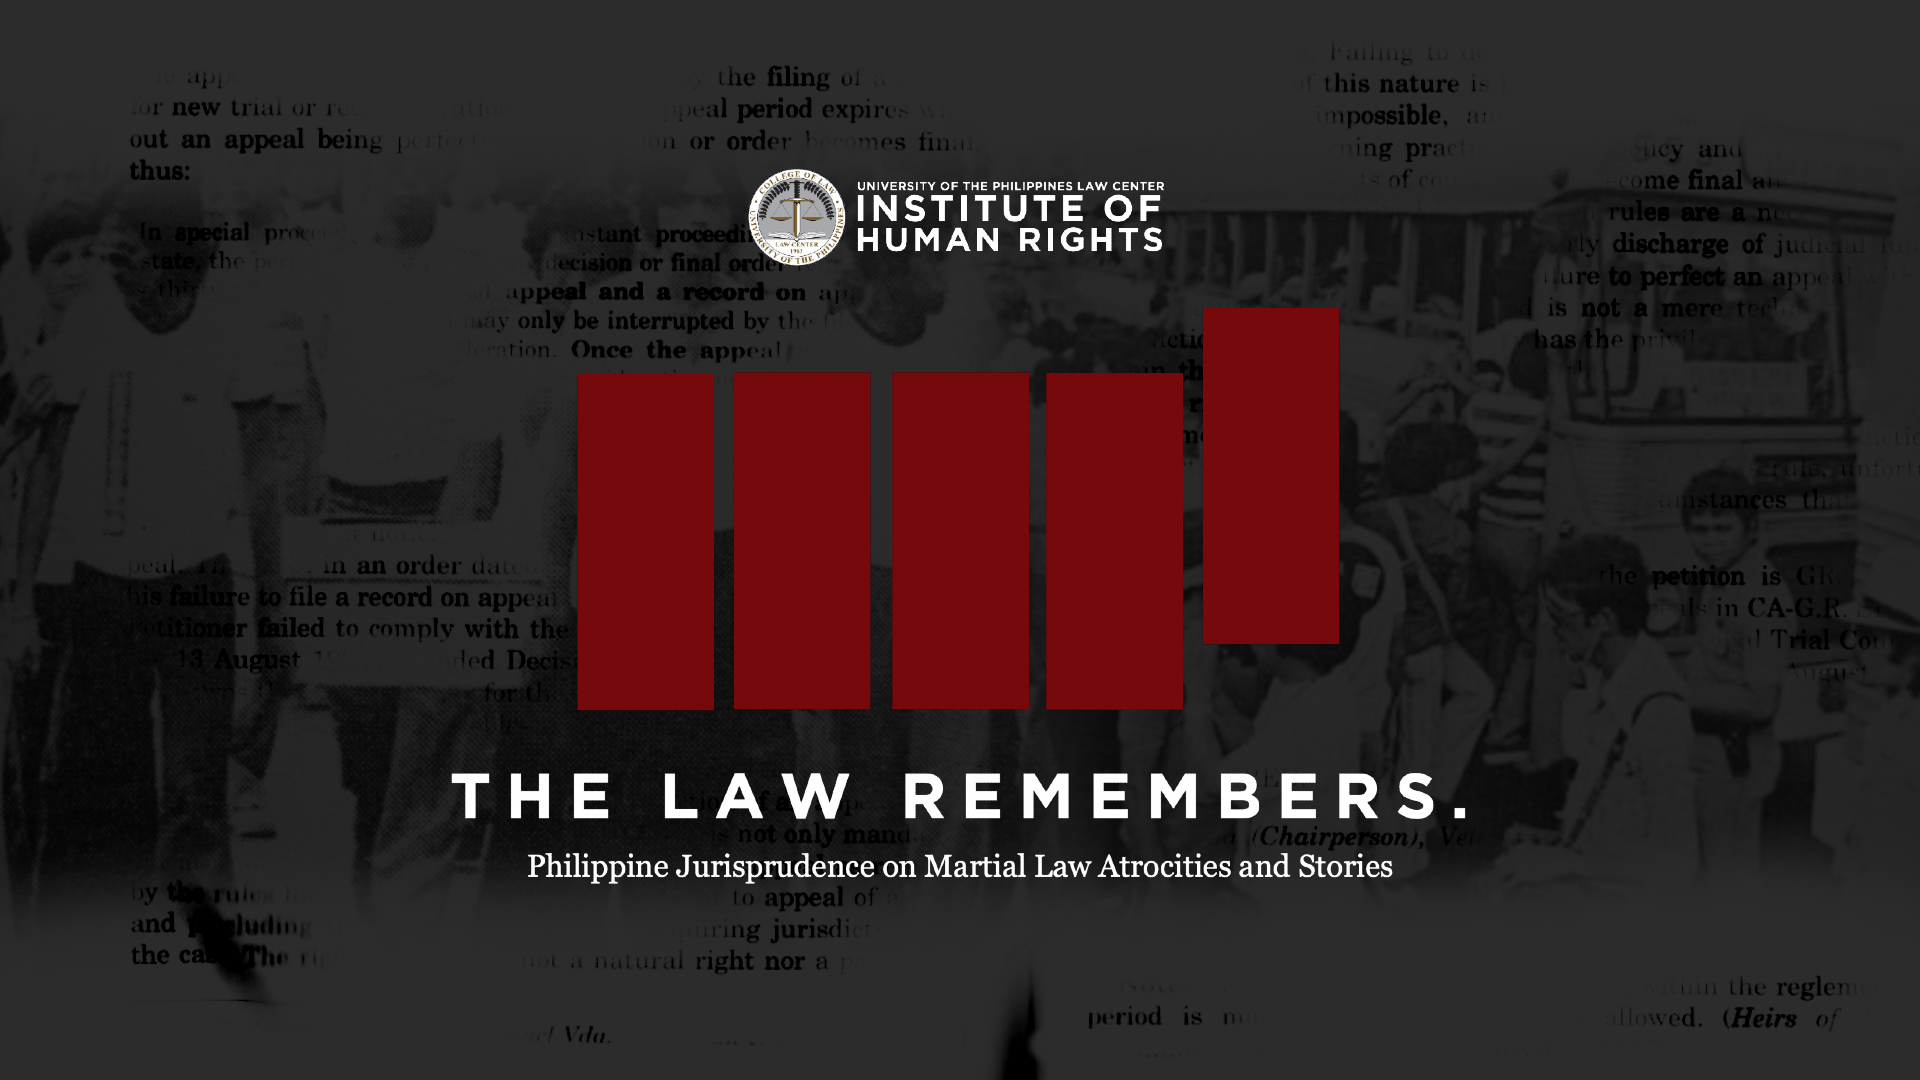 Jurisprudence on Martial Law Atrocities and Stories